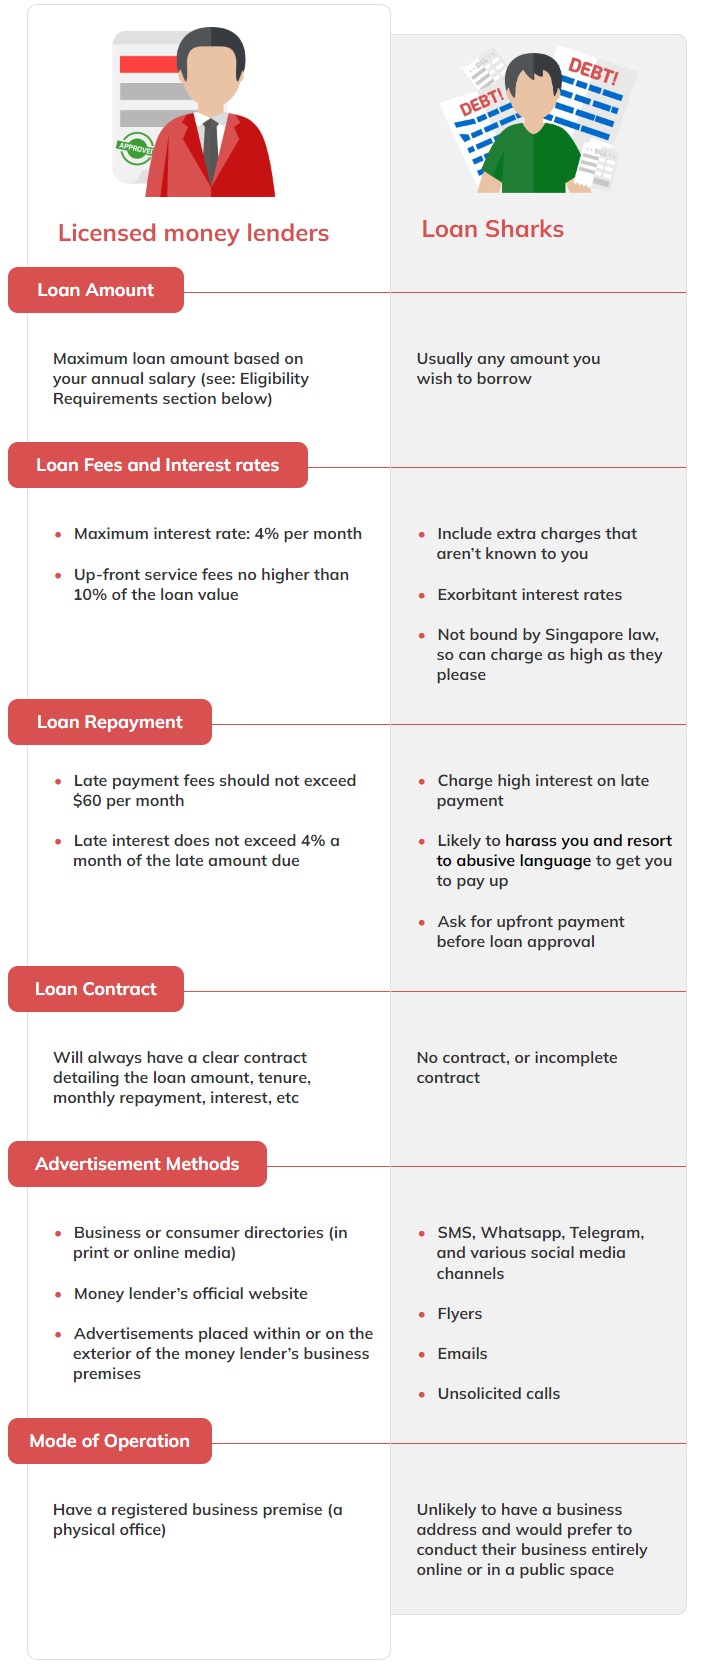 An infographic table detailing the differences between loan sharks and licensed money lenders in Singapore